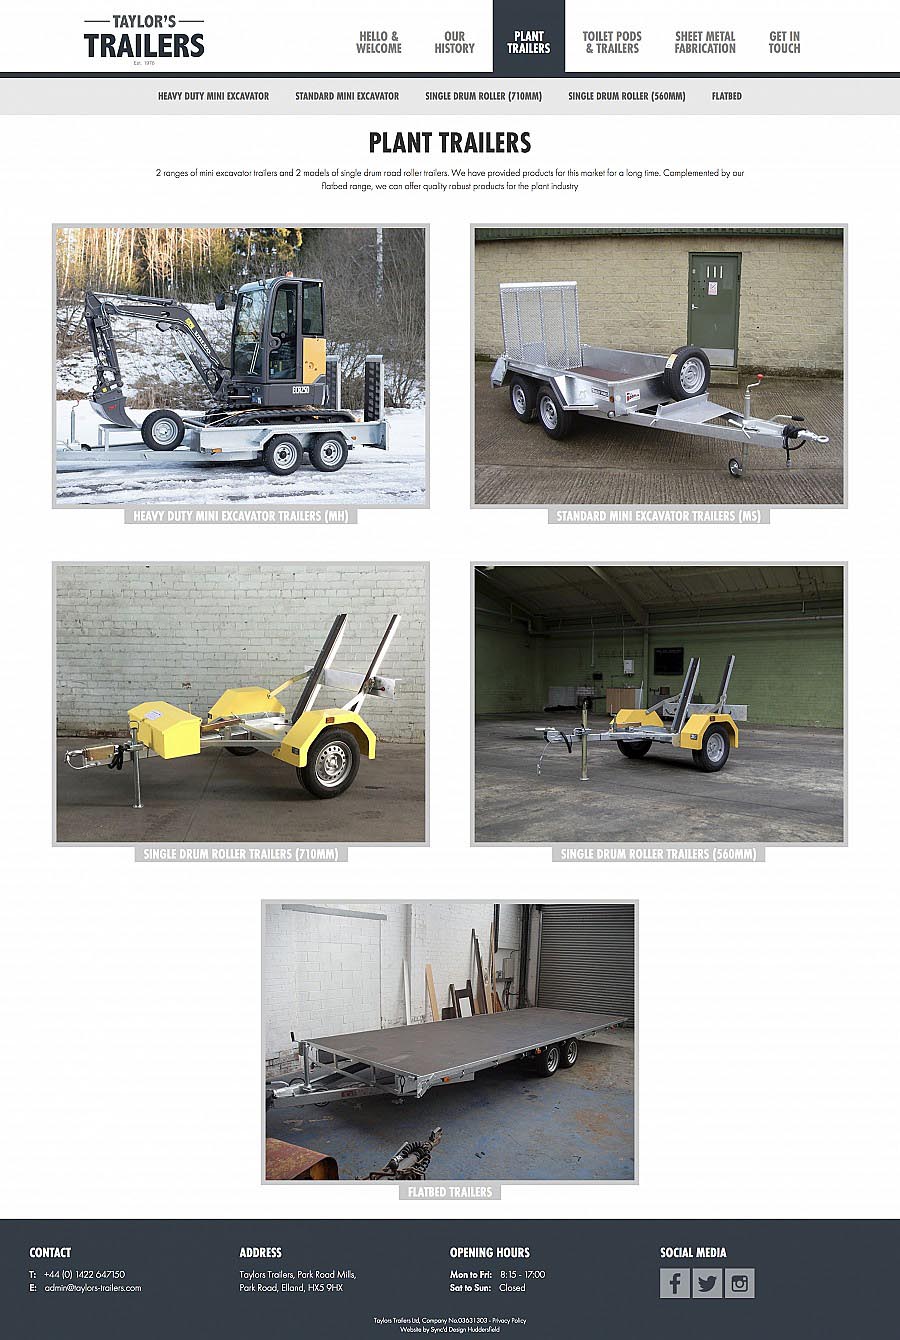 Taylors Trailers Products Page